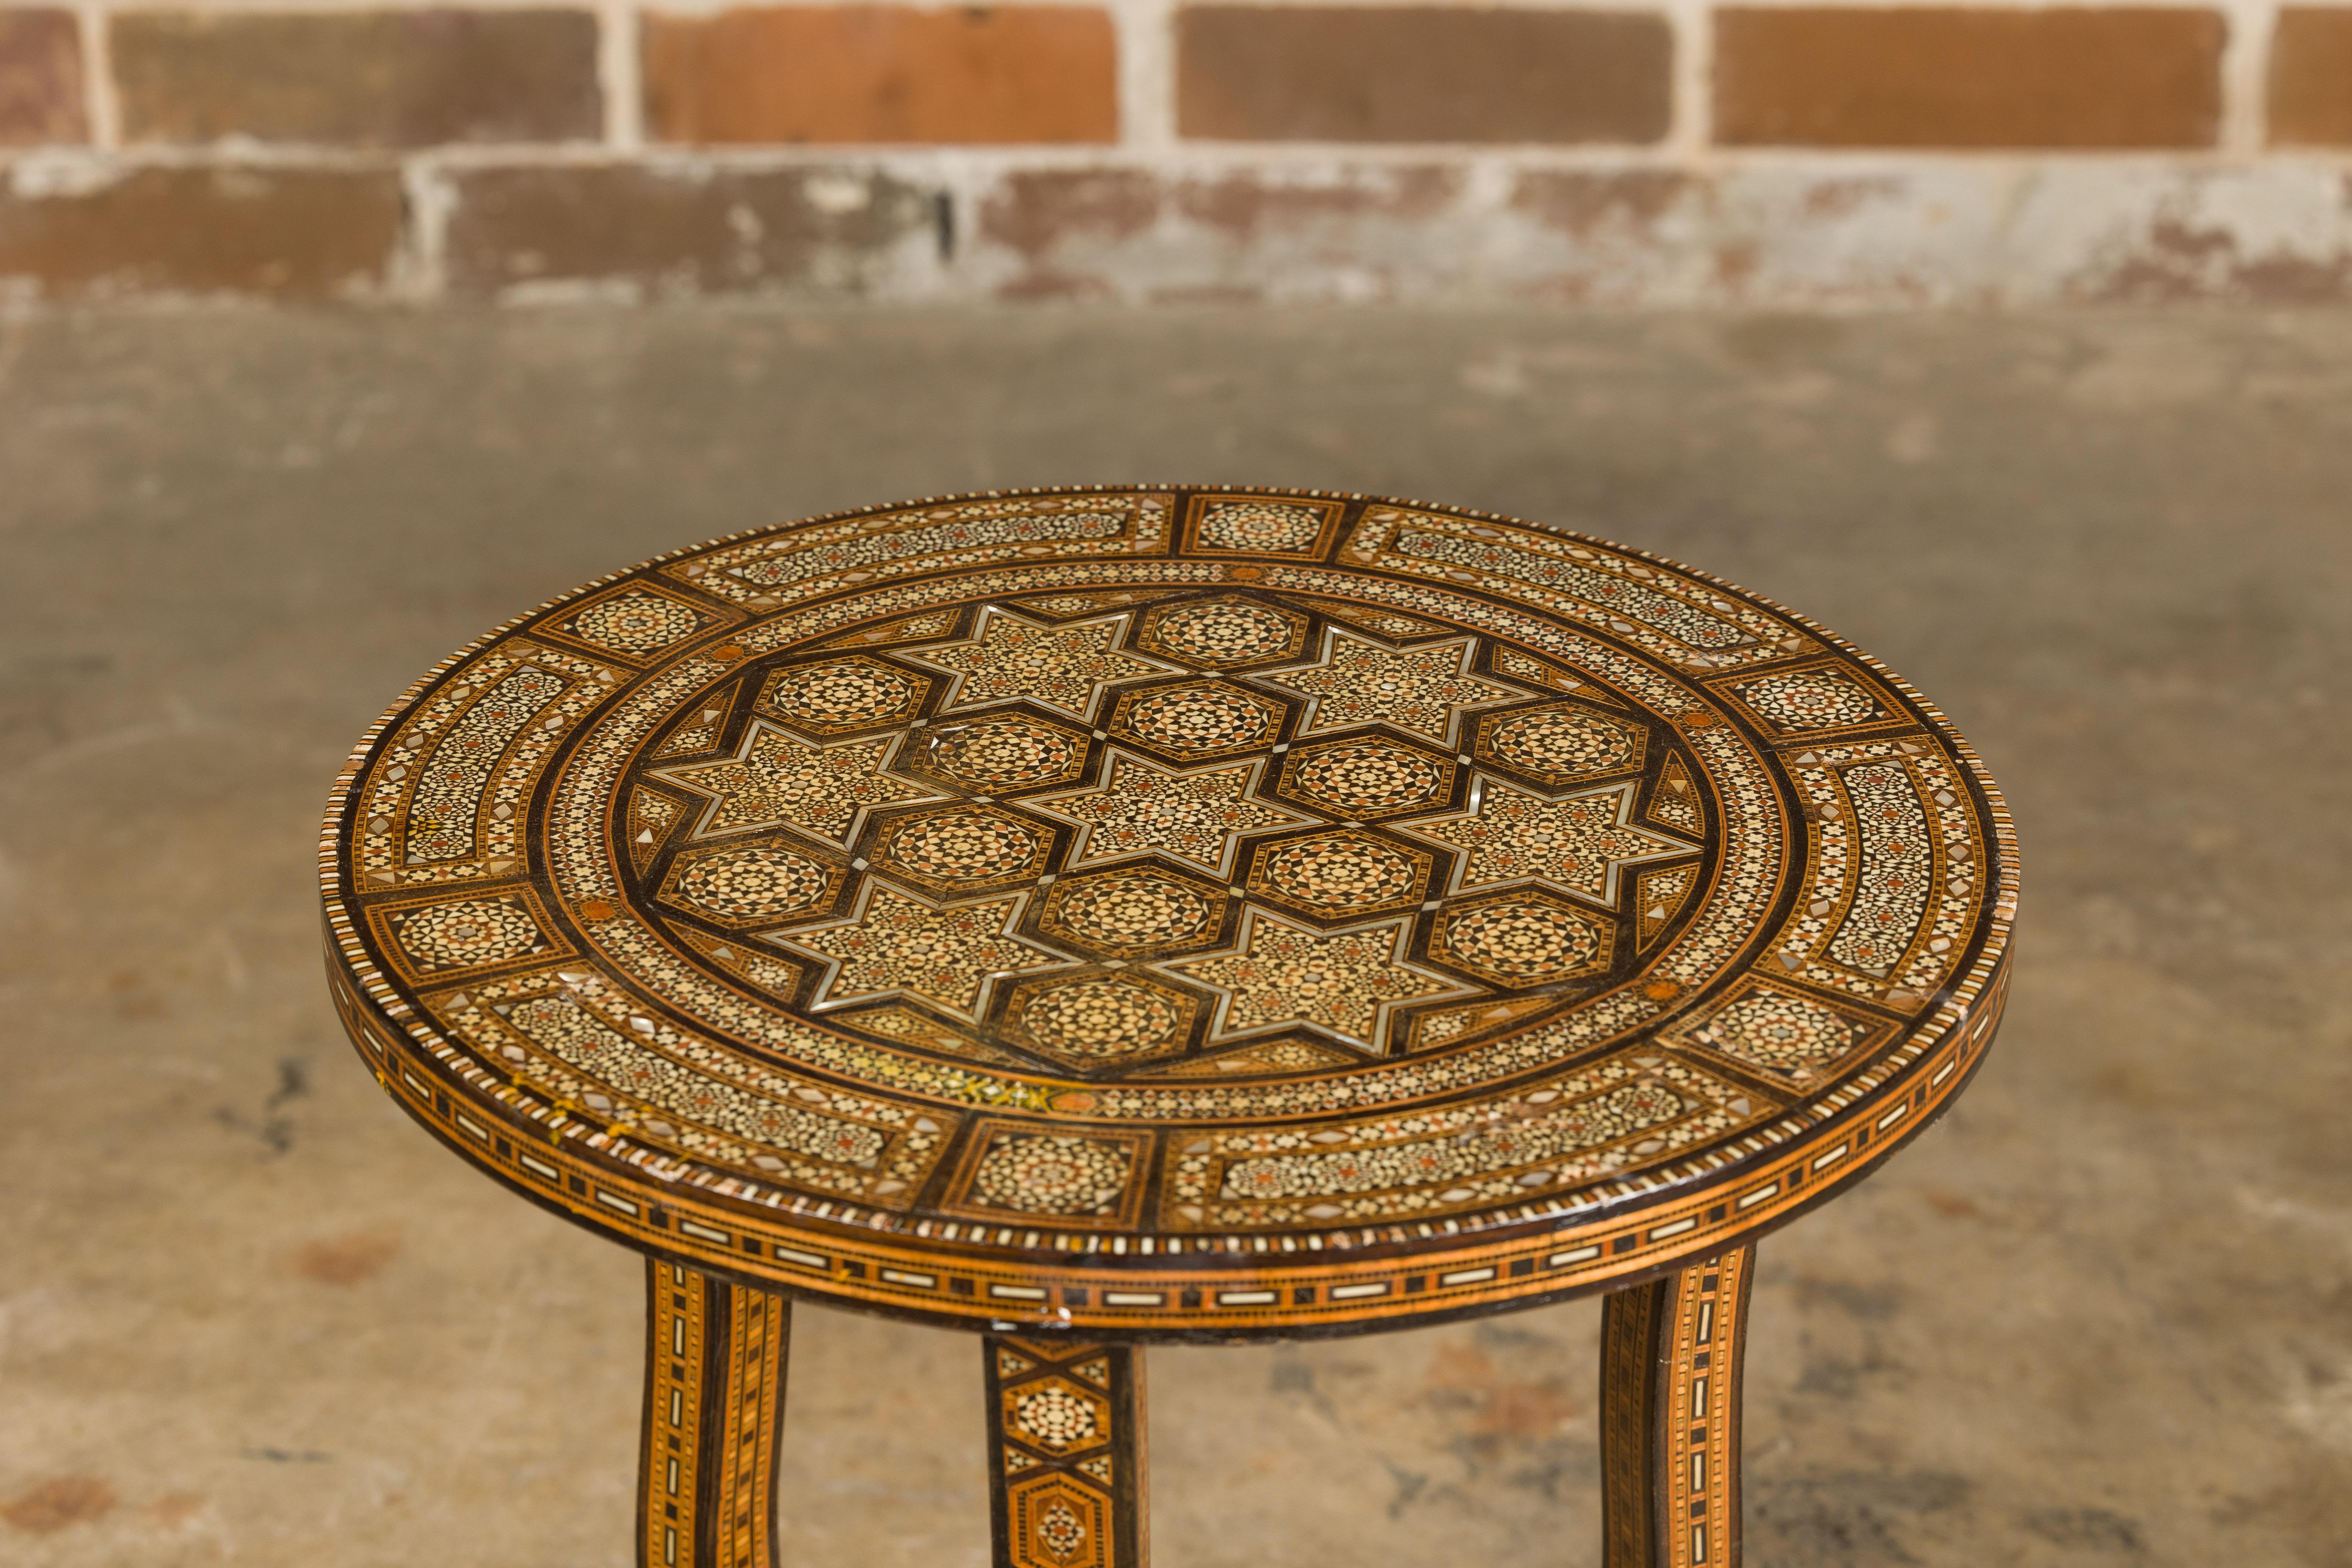 Moroccan 1900s Moorish Style Table with Geometric Bone Inlay and Curving Legs For Sale 3